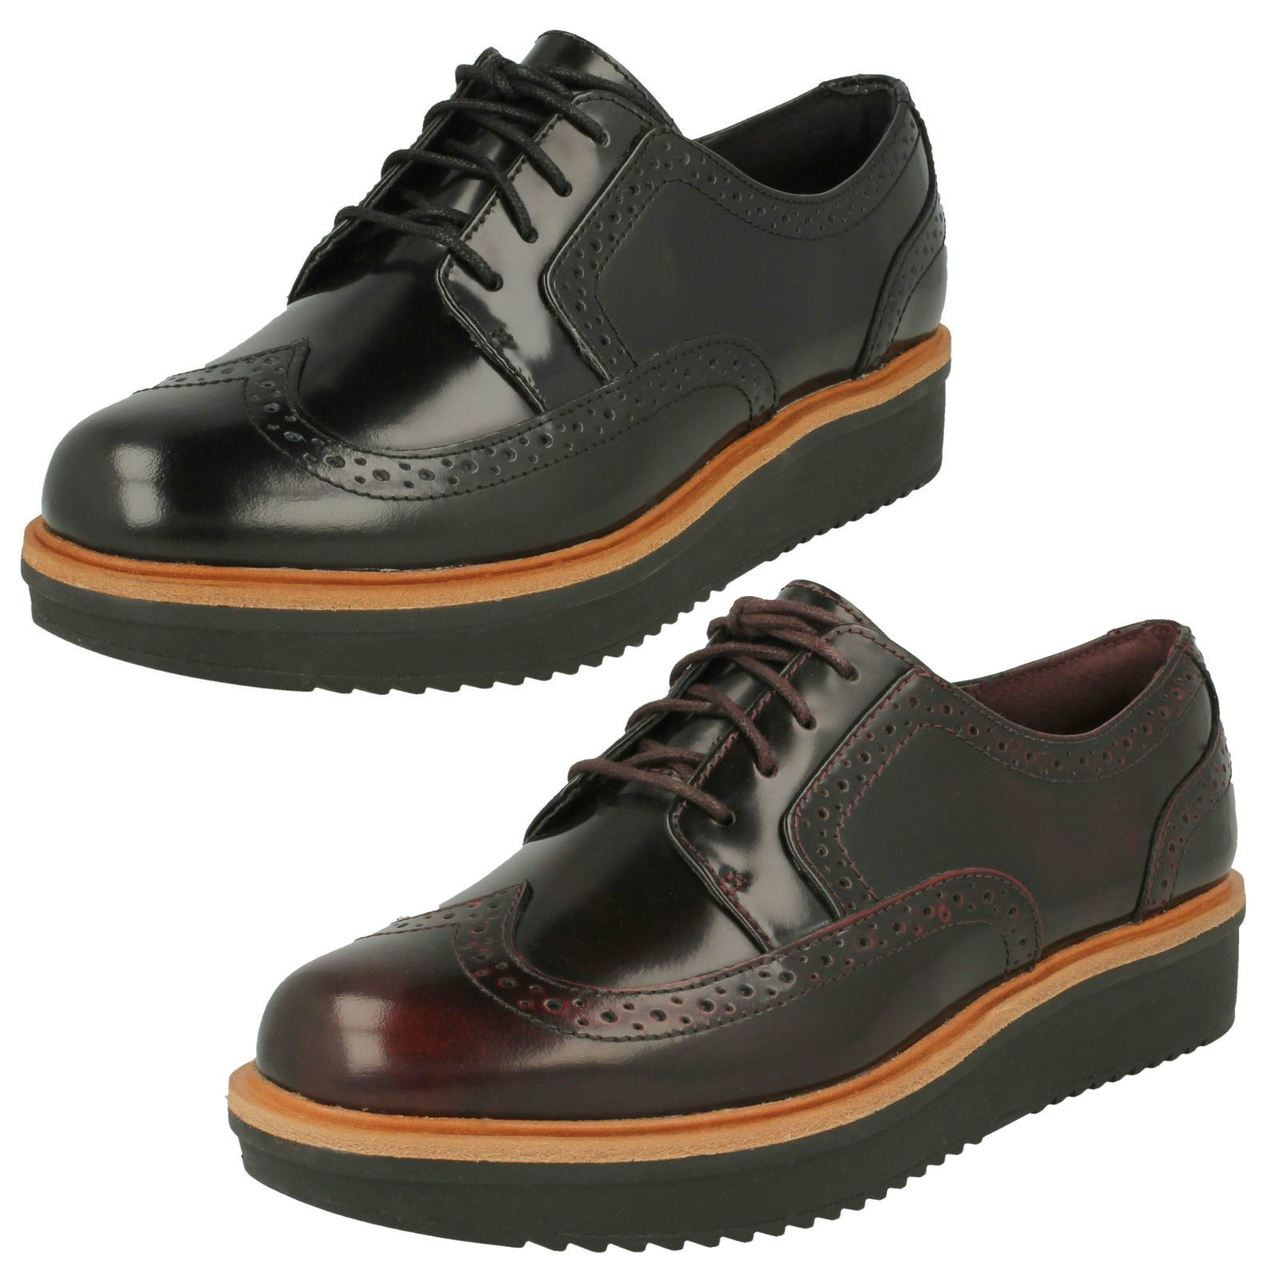 Ladies Clarks Casual Brogue Style Shoes 